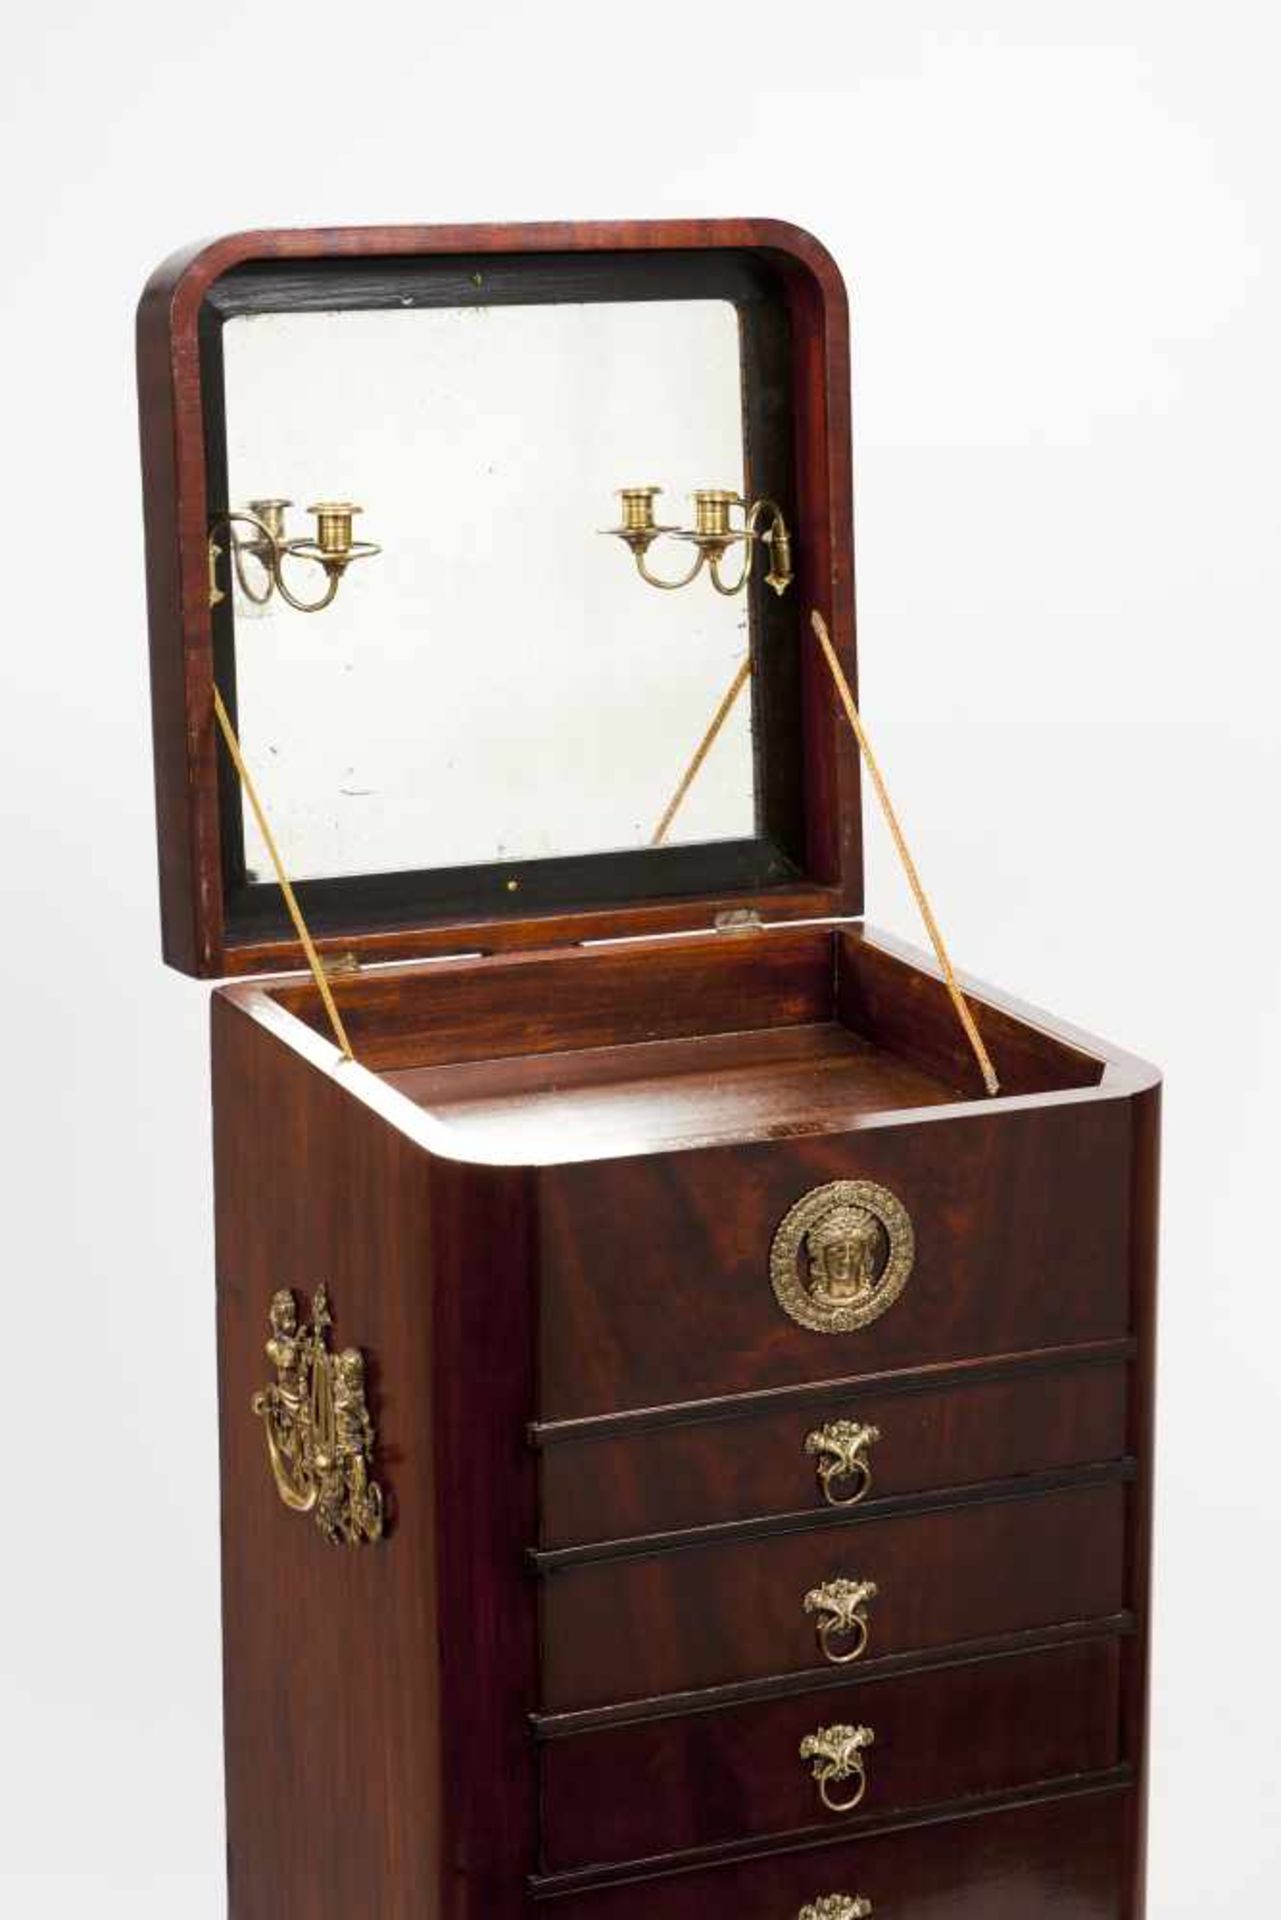 An Empire dressing table - Image 2 of 2